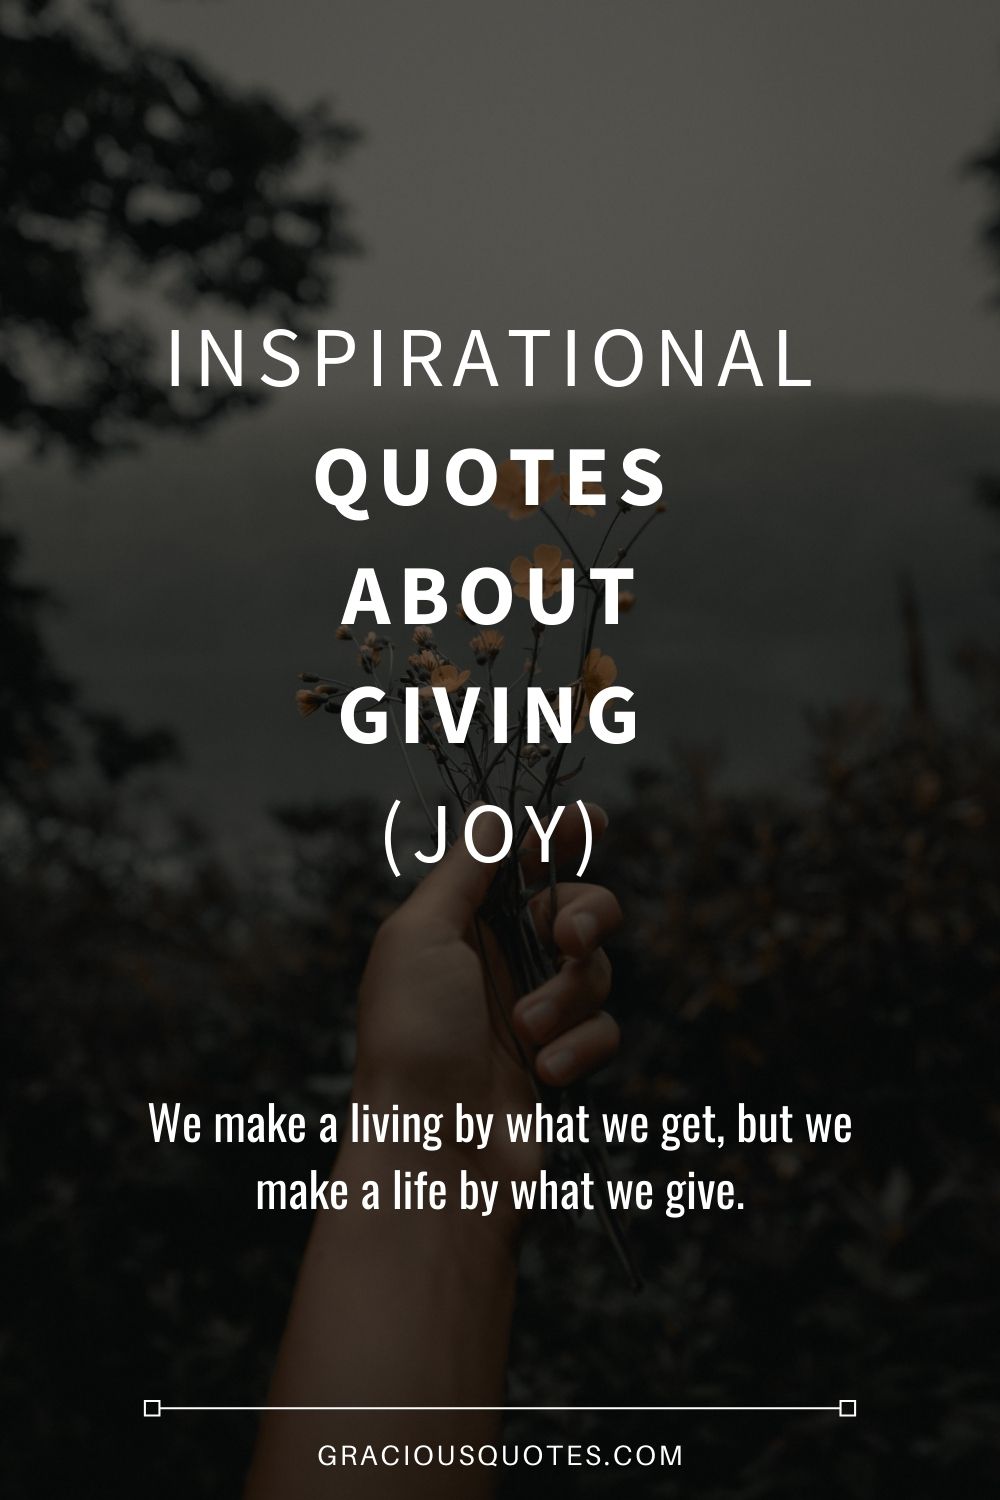 Inspirational Quotes About Giving JOY Gracious Quotes